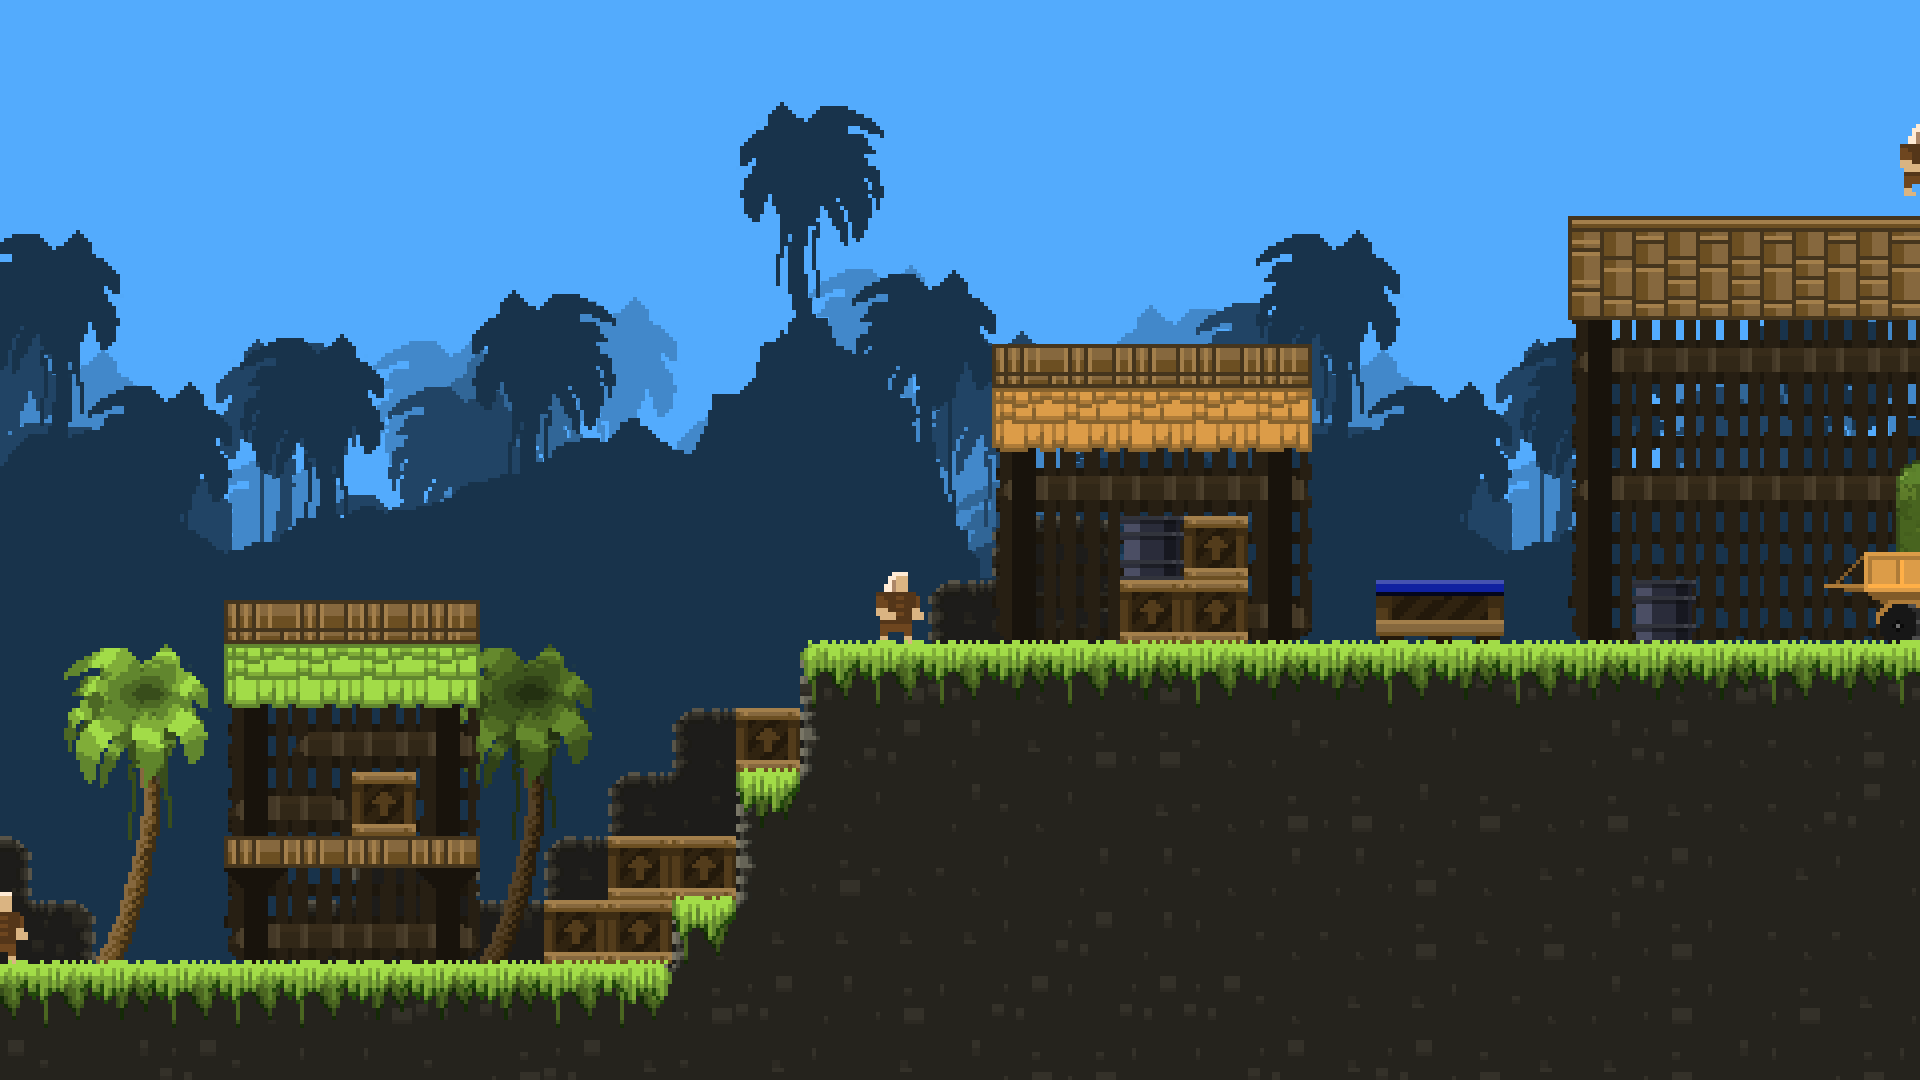 A jungle introduction level. There's also a trampoline!